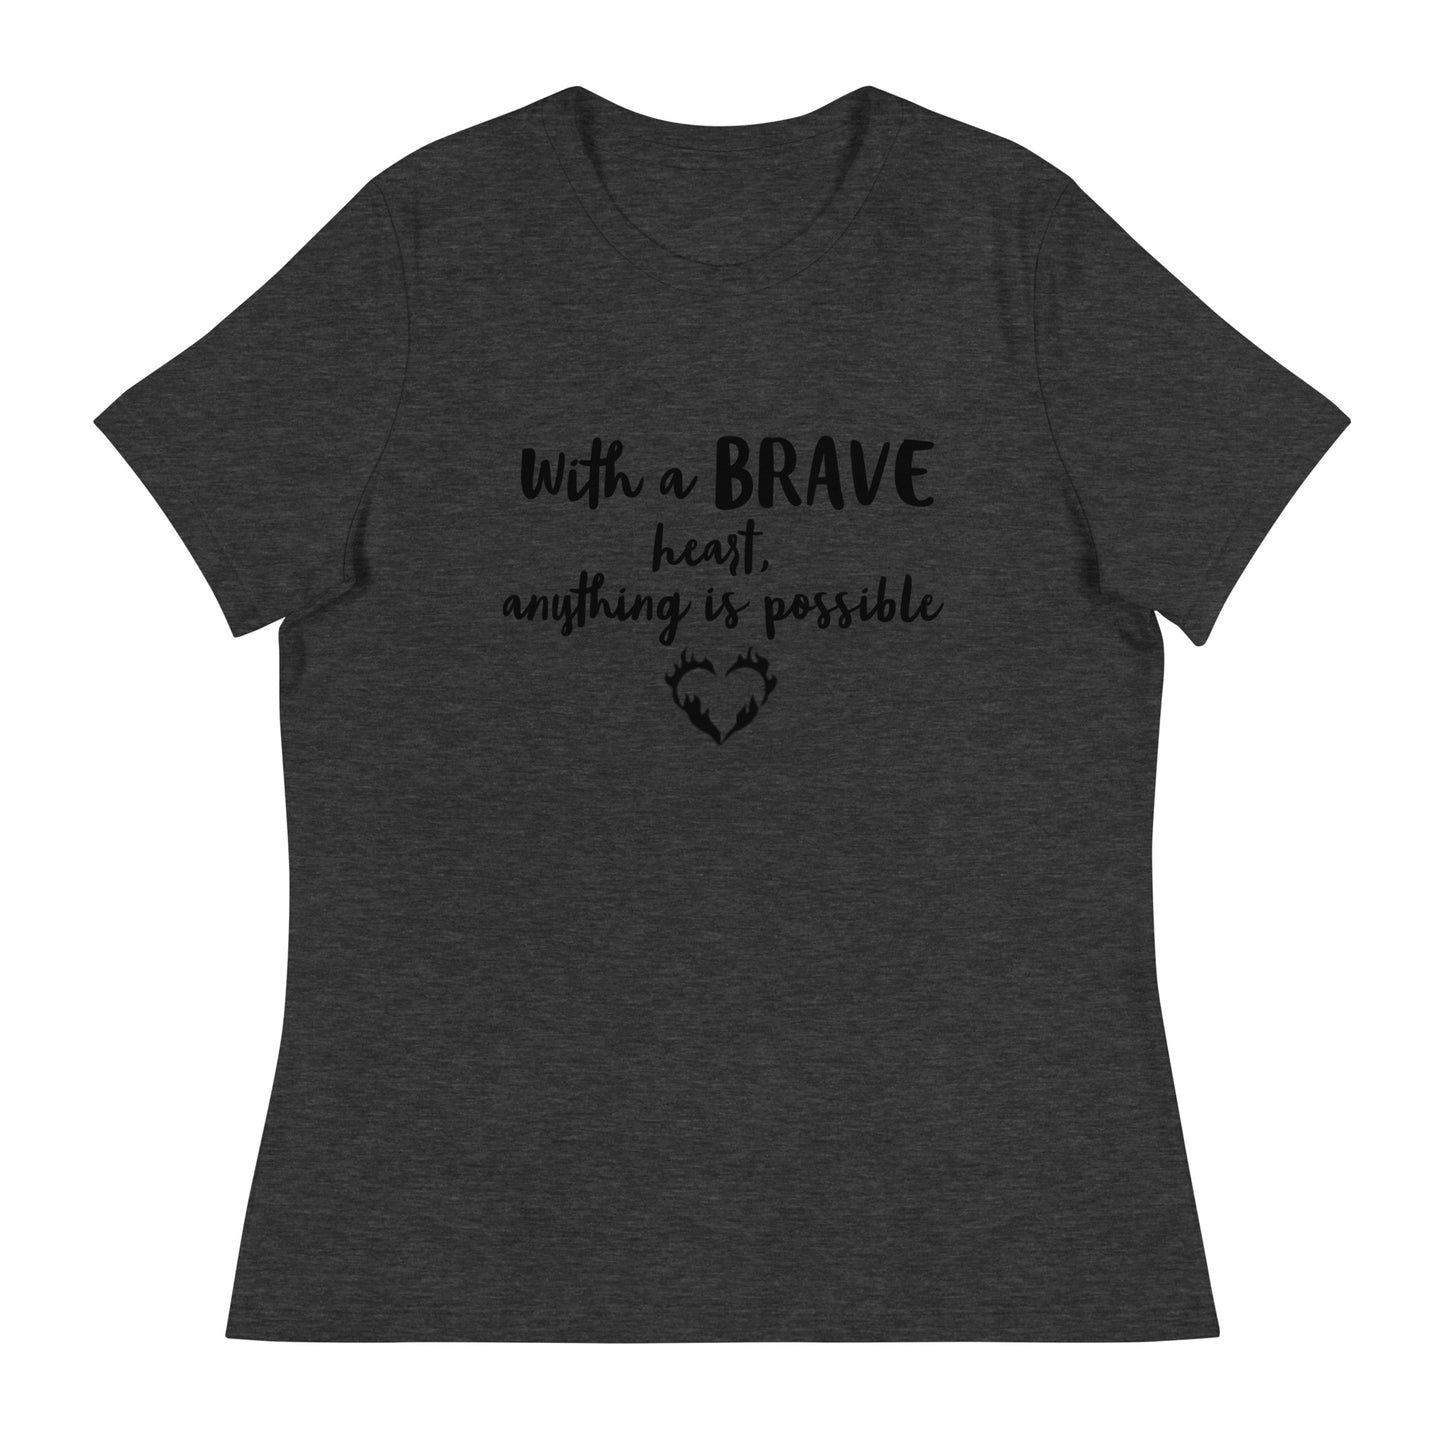 With a Brave Heart anything is possible women's tee